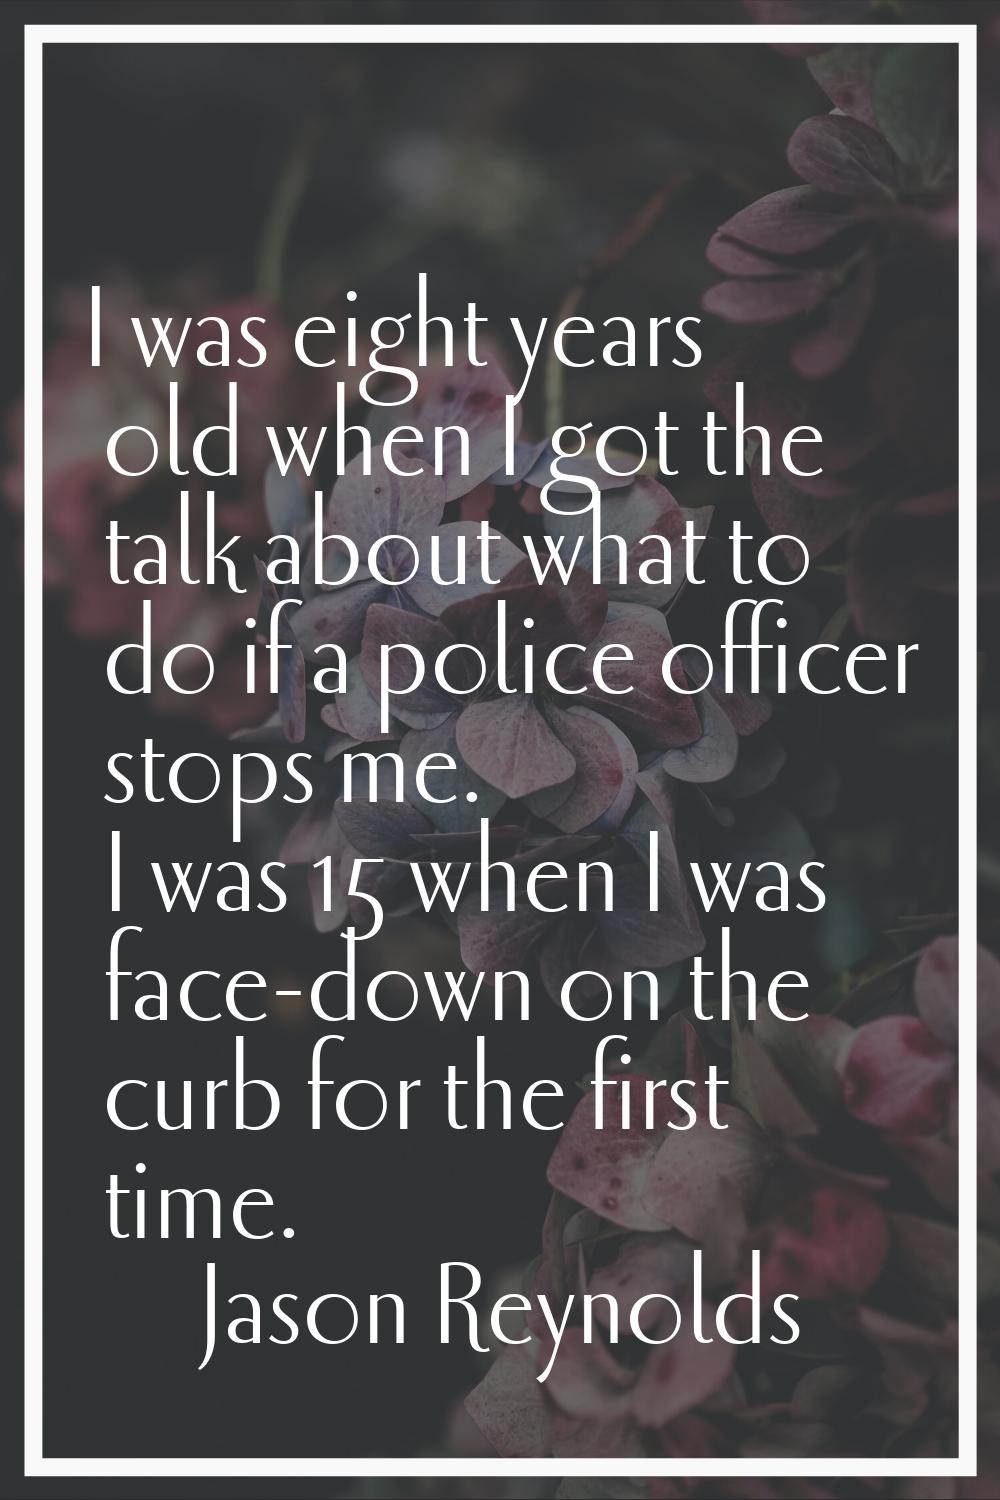 I was eight years old when I got the talk about what to do if a police officer stops me. I was 15 w